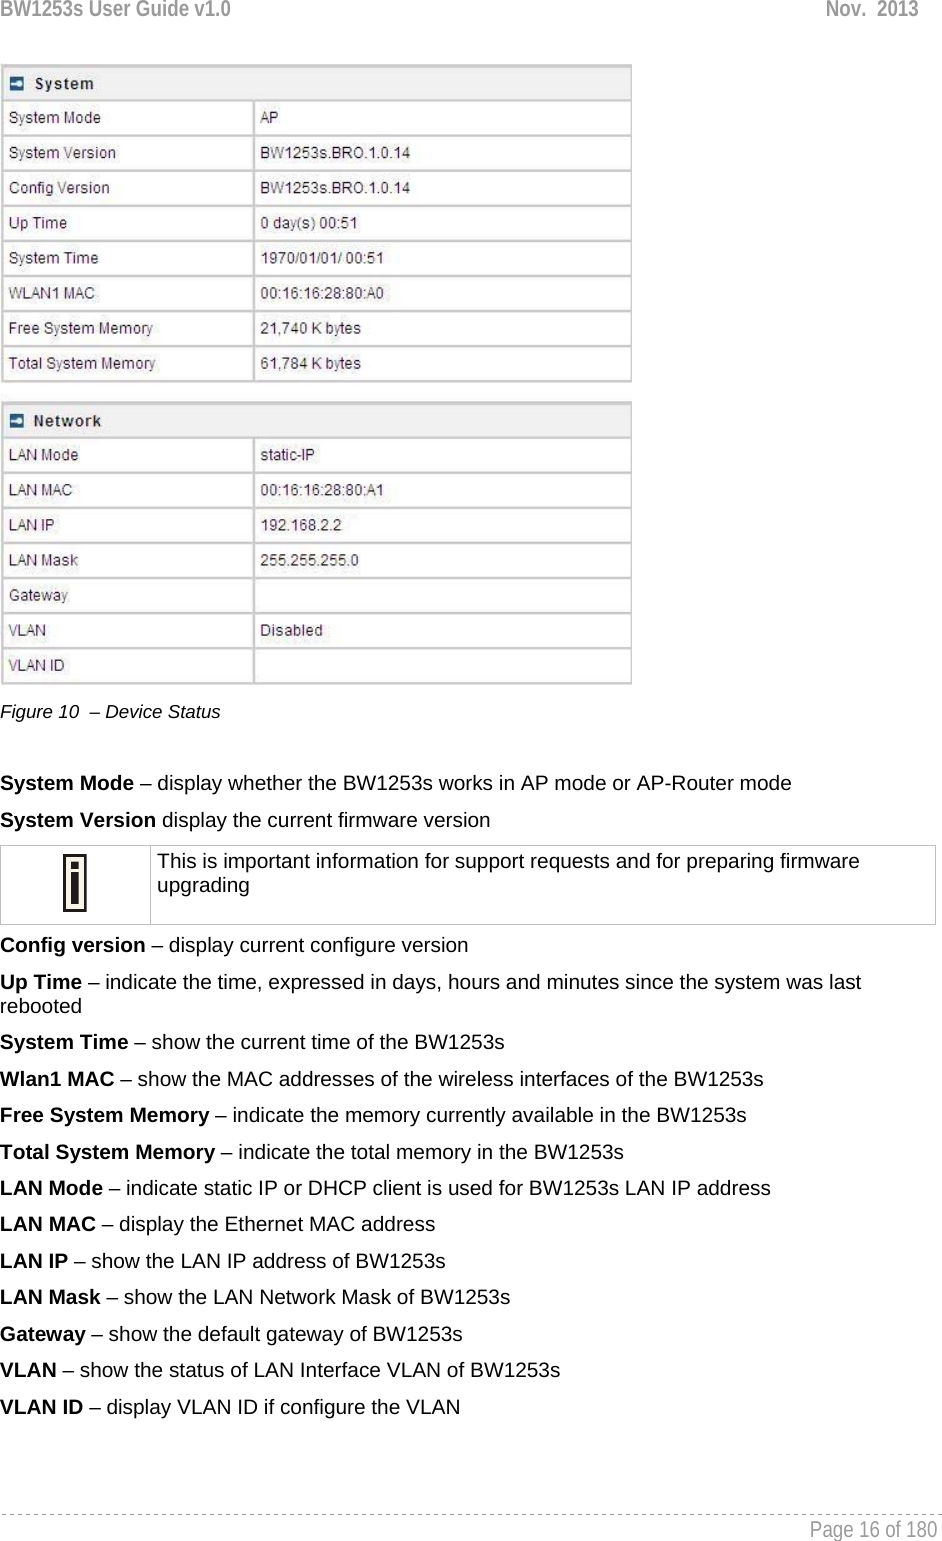 BW1253s User Guide v1.0  Nov.  2013     Page 16 of 180    Figure 10  – Device Status  System Mode – display whether the BW1253s works in AP mode or AP-Router mode System Version display the current firmware version  This is important information for support requests and for preparing firmware upgrading Config version – display current configure version Up Time – indicate the time, expressed in days, hours and minutes since the system was last rebooted System Time – show the current time of the BW1253s Wlan1 MAC – show the MAC addresses of the wireless interfaces of the BW1253s Free System Memory – indicate the memory currently available in the BW1253s Total System Memory – indicate the total memory in the BW1253s LAN Mode – indicate static IP or DHCP client is used for BW1253s LAN IP address LAN MAC – display the Ethernet MAC address LAN IP – show the LAN IP address of BW1253s LAN Mask – show the LAN Network Mask of BW1253s Gateway – show the default gateway of BW1253s VLAN – show the status of LAN Interface VLAN of BW1253s VLAN ID – display VLAN ID if configure the VLAN  